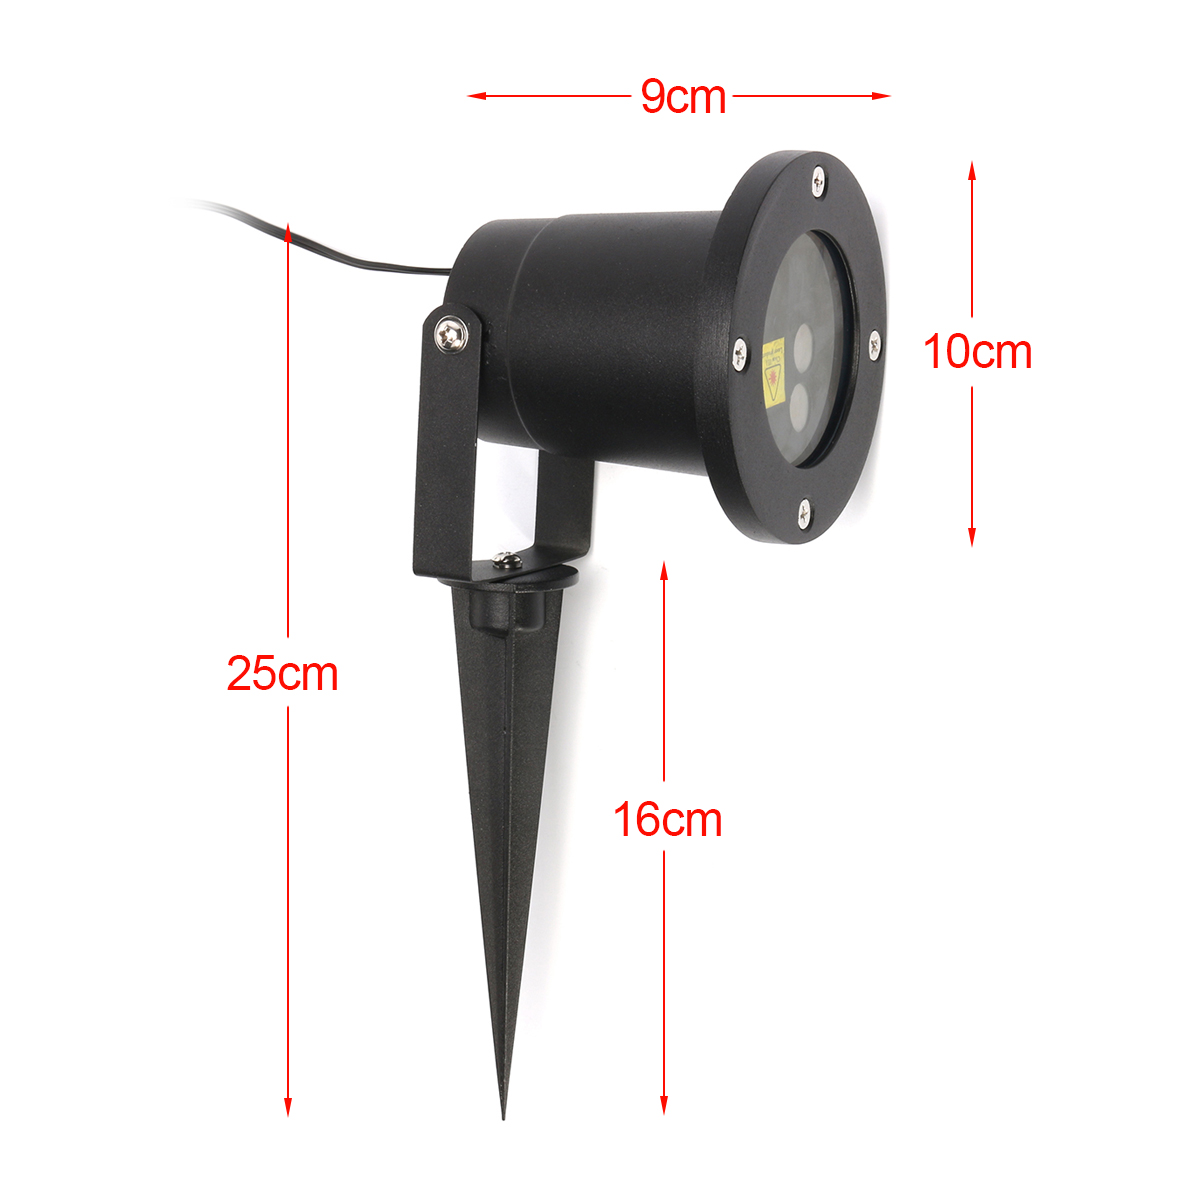 Christmas-Star-Projector-Stage-Light-Waterproof-RG-LED-Remote-Control-Outdoor-Landscape-Lamp-Christm-1345110-2